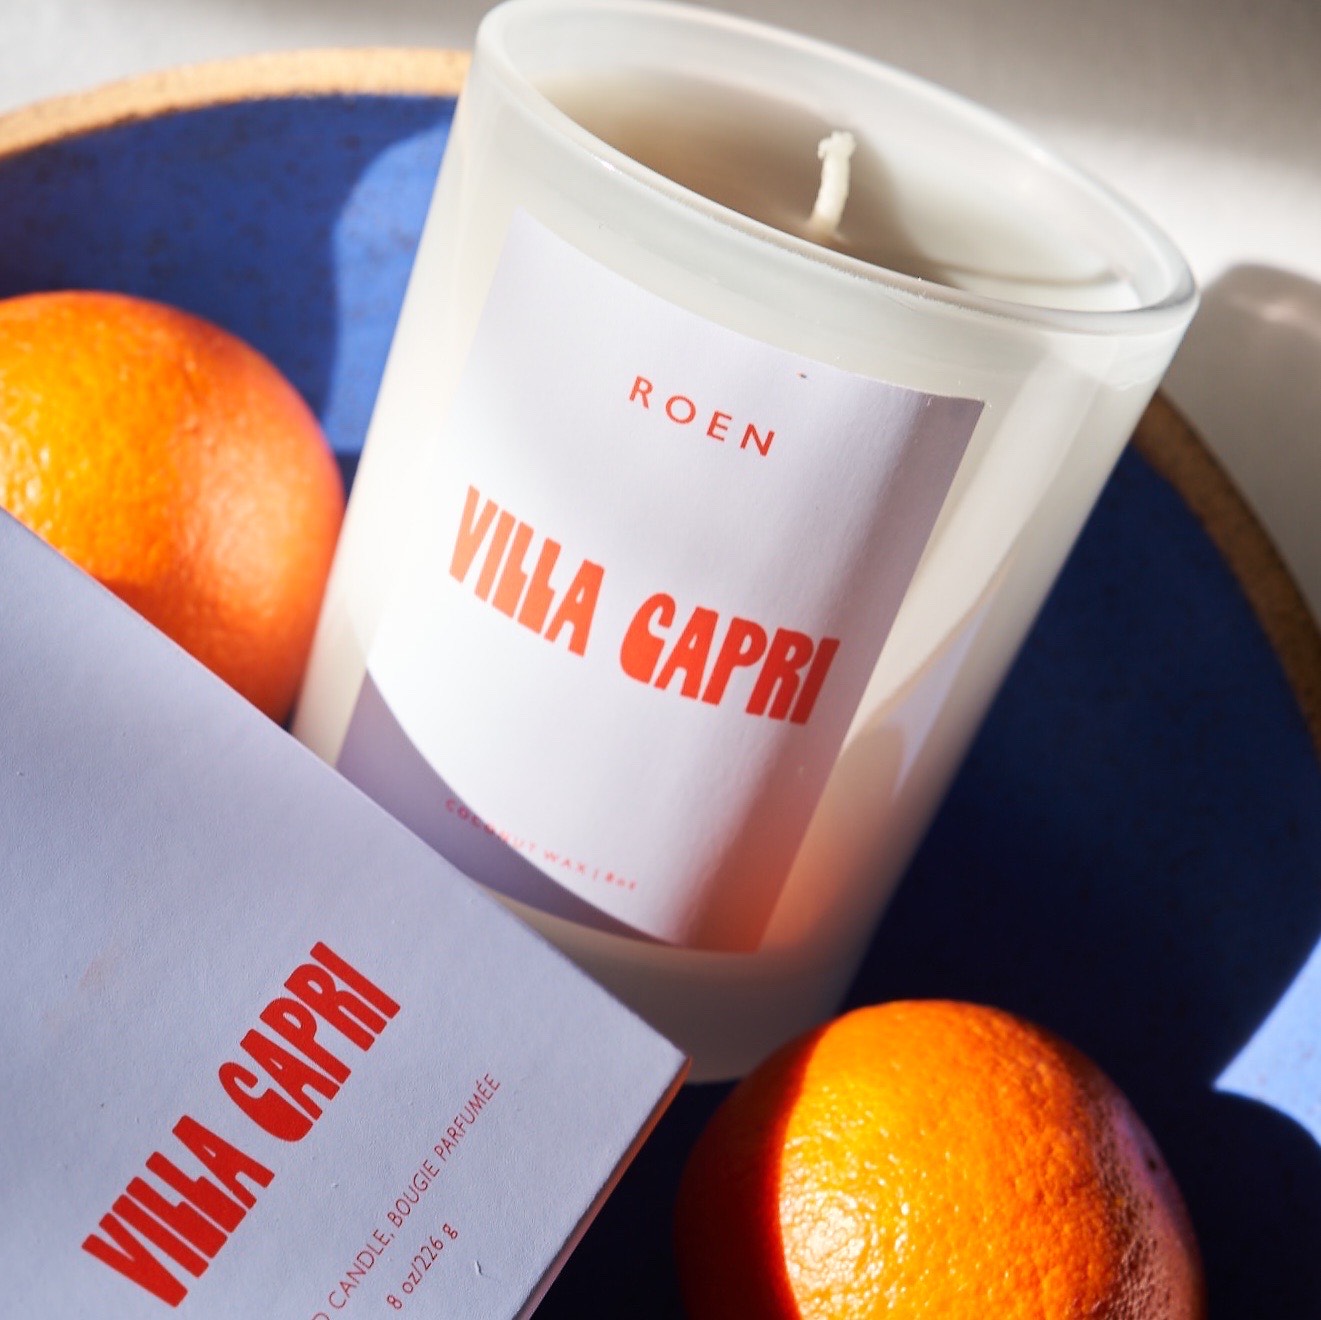 R O E N Villa Capri Scented Candle - Osmology Scented Candles & Home Fragrance